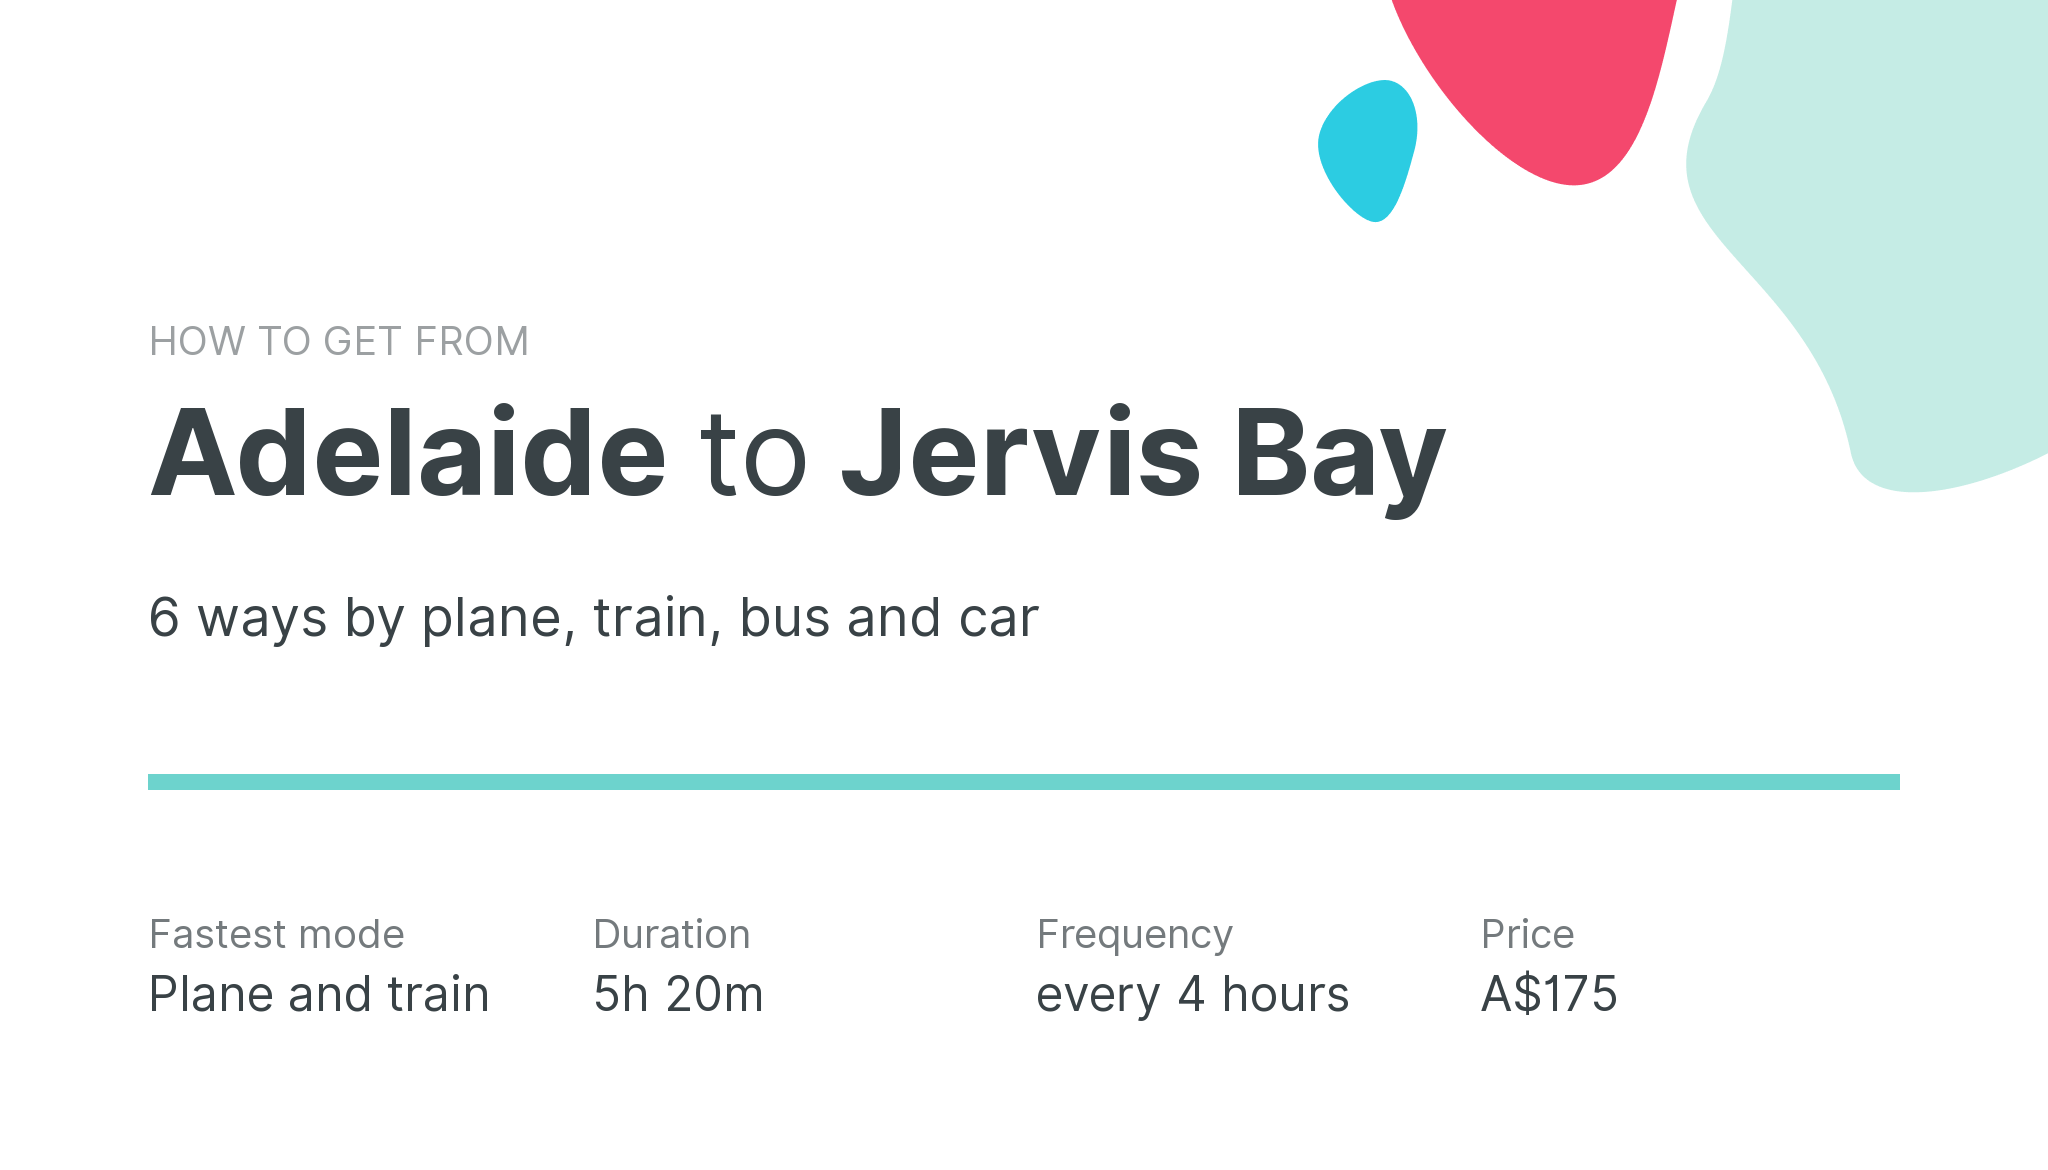 How do I get from Adelaide to Jervis Bay